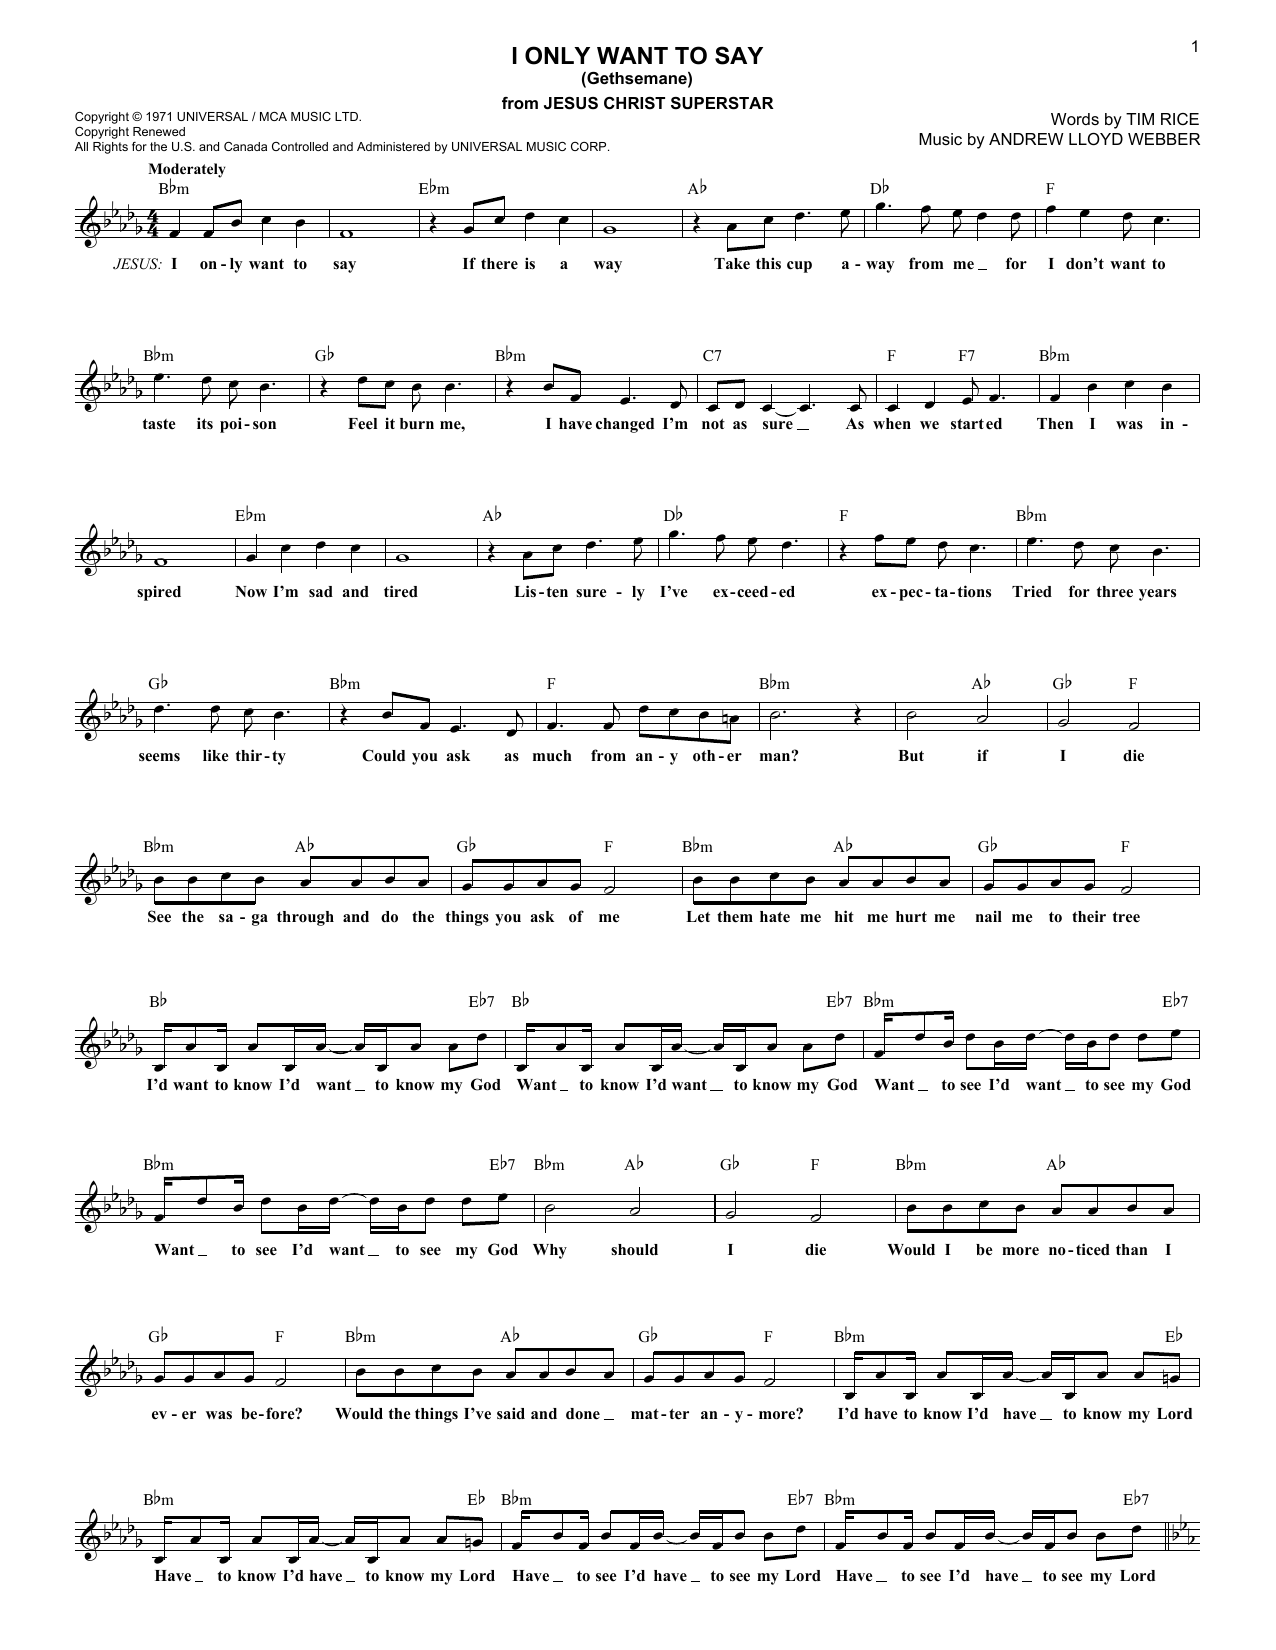 Download Andrew Lloyd Webber I Only Want To Say (Gethsemane) Sheet Music